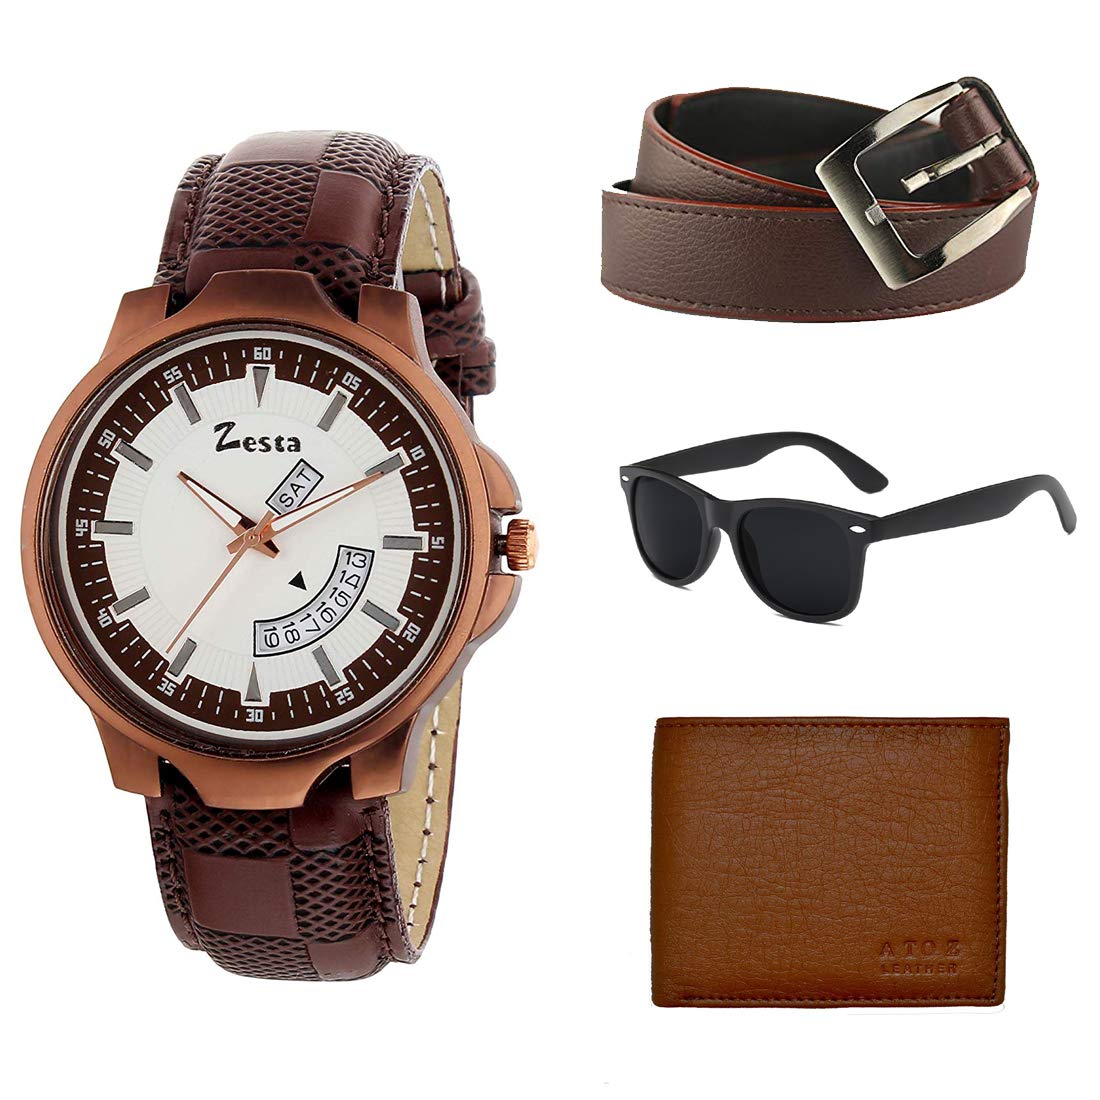 Zesta Combo Pack of a Brown Analogue Watch with a Sunglass, a Wallet and a Belt for Men and Boys